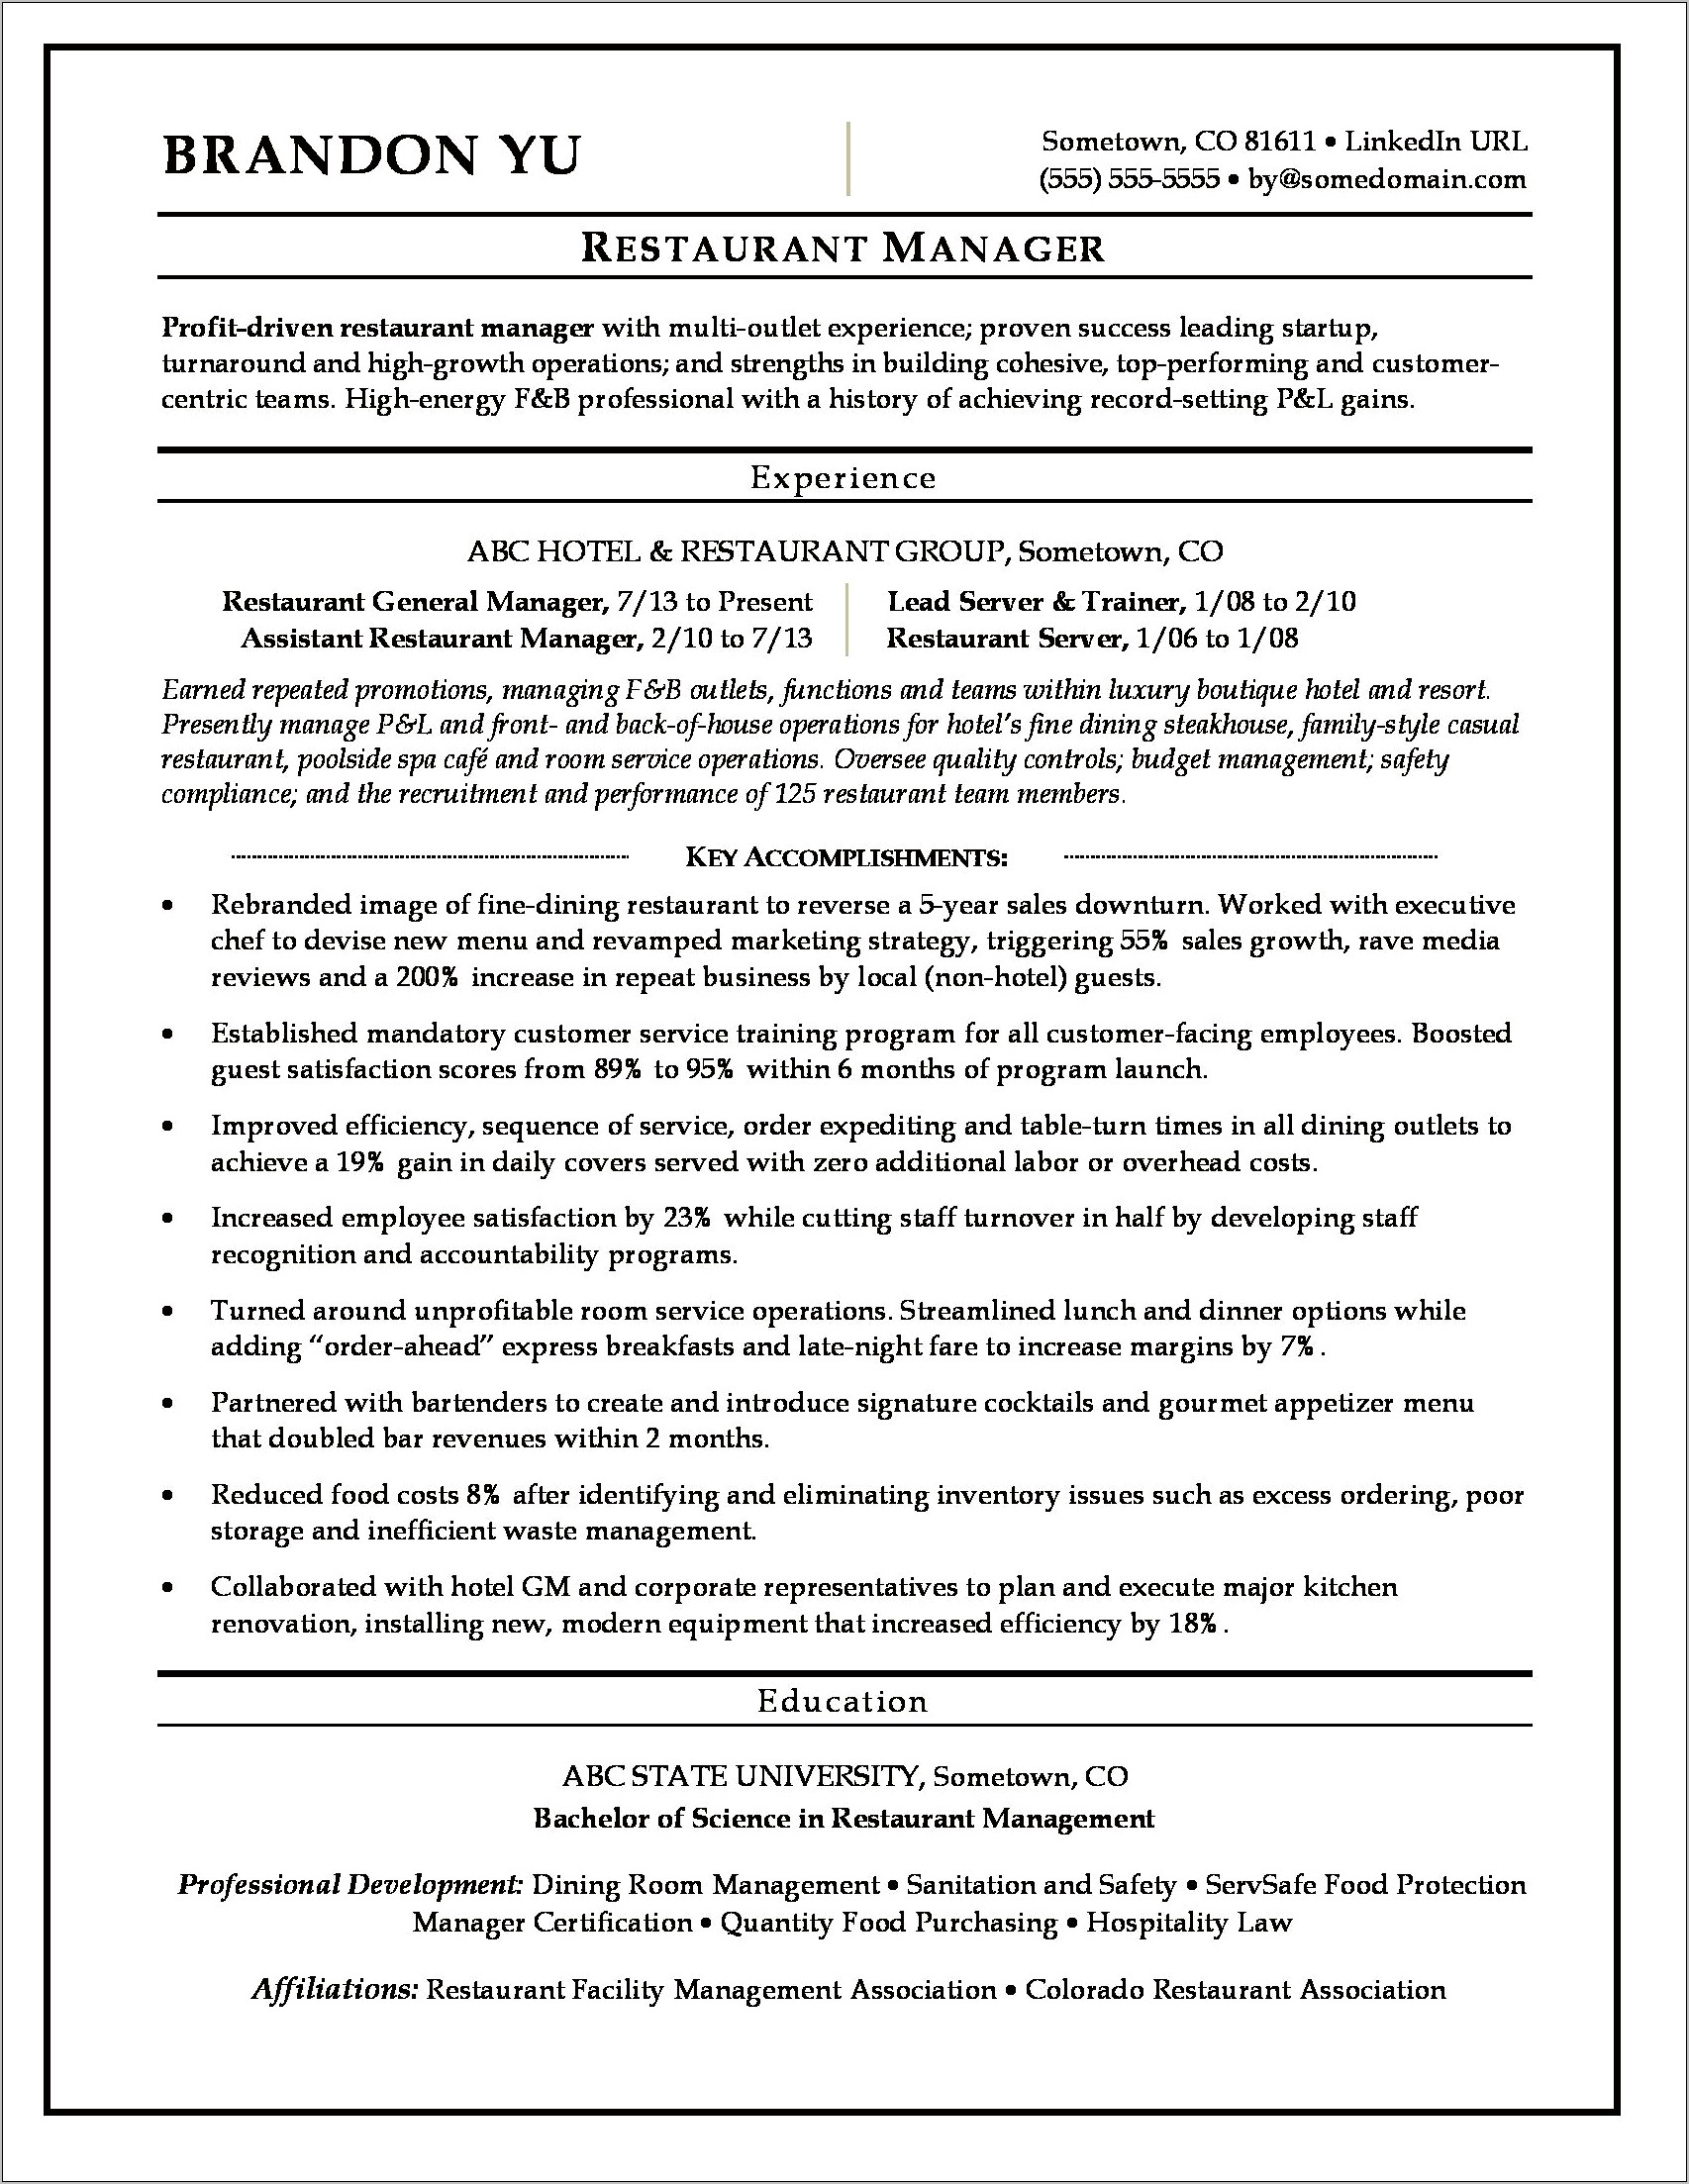 Professional Achievements On Resume Examples